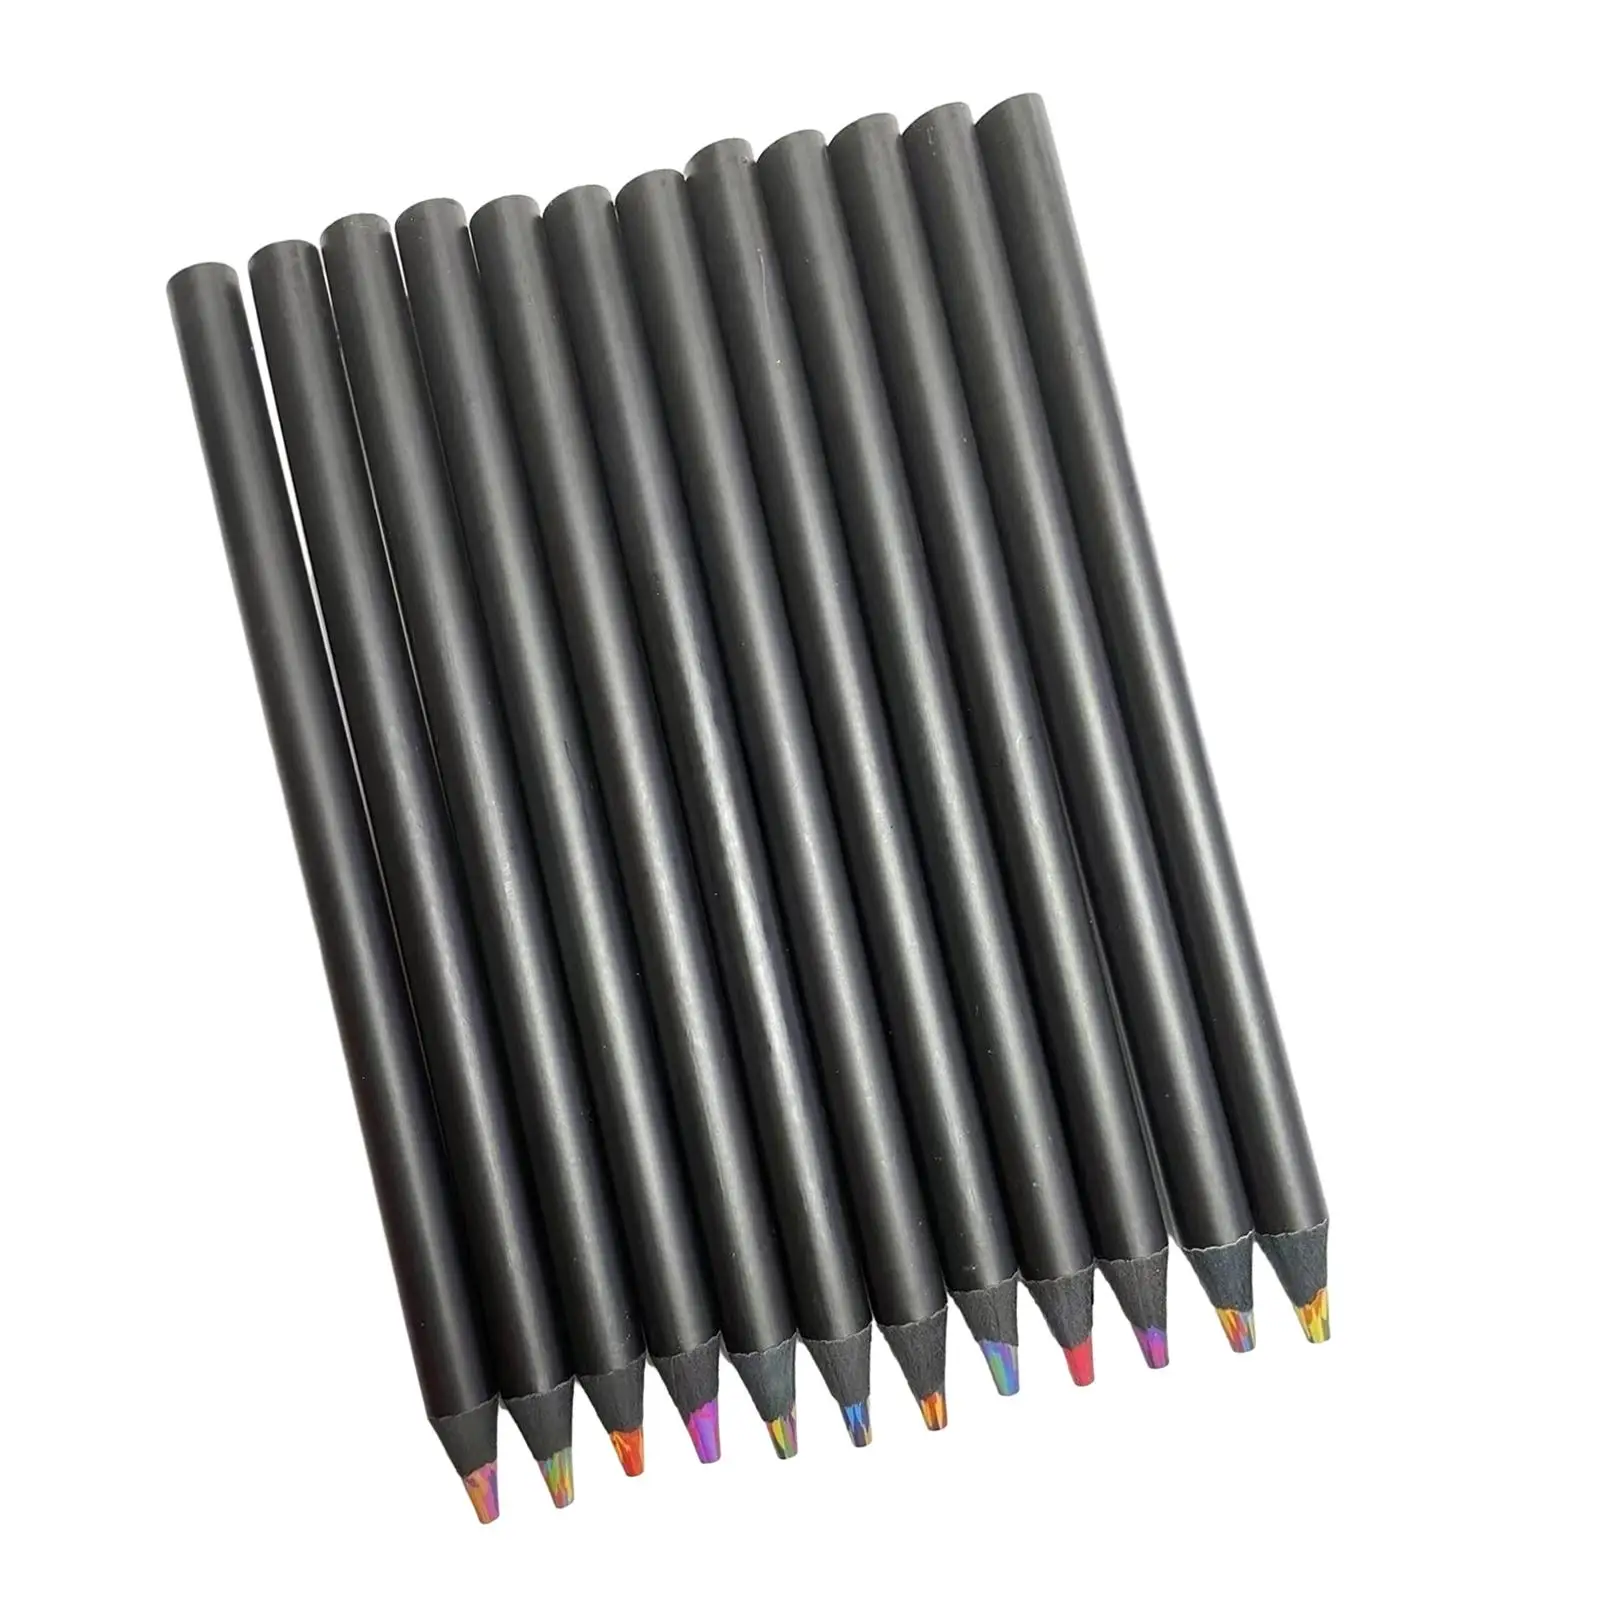 Rainbow Colored Pencils Sketching Art Supplies Gifts Multicolored Pencils